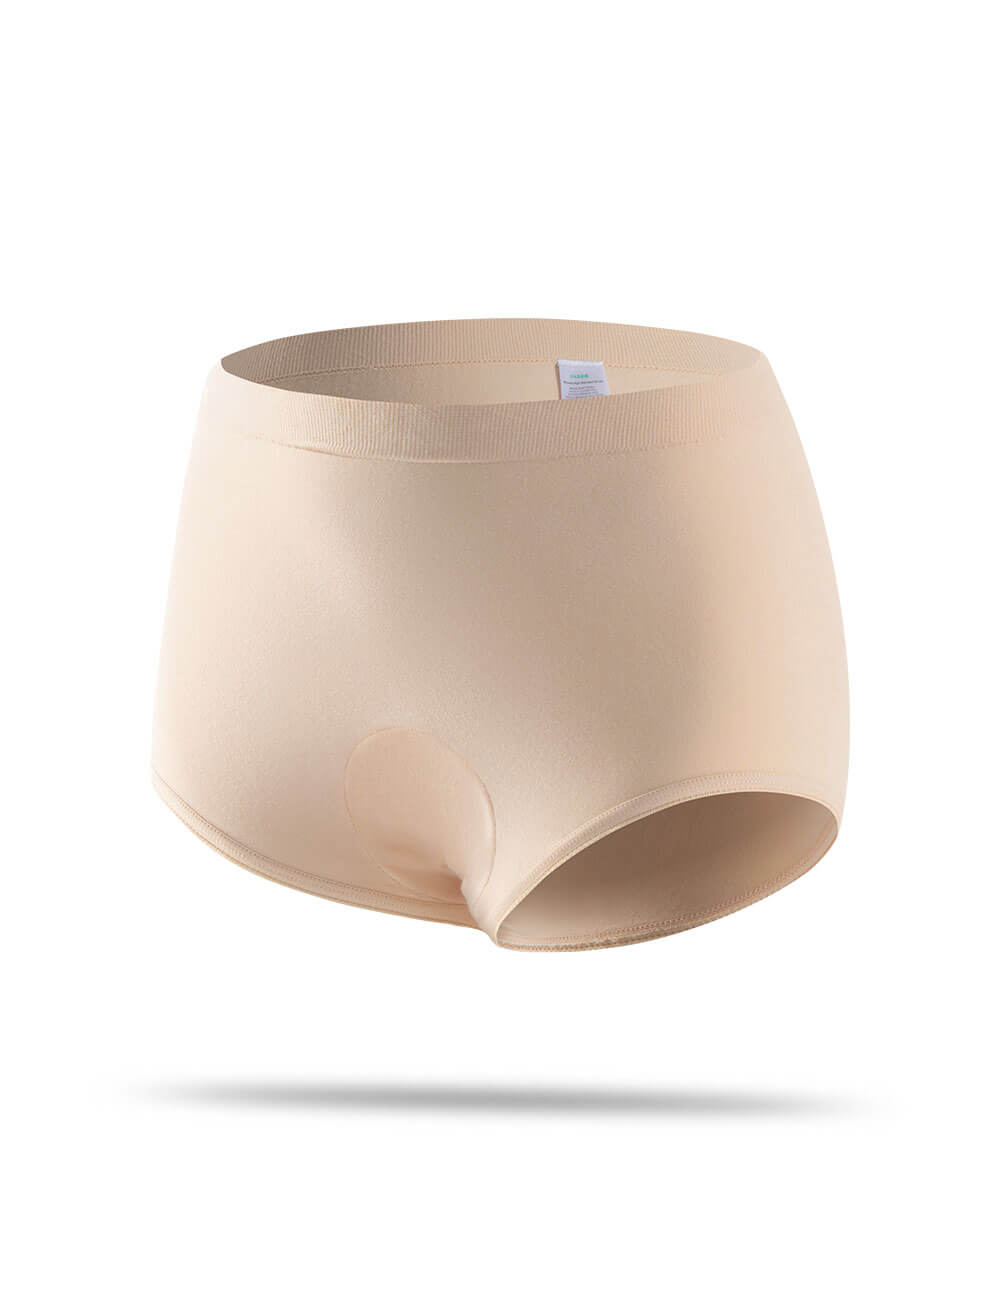 The 3 Best Washable Incontinence Underwear From Carer – CARERSPK